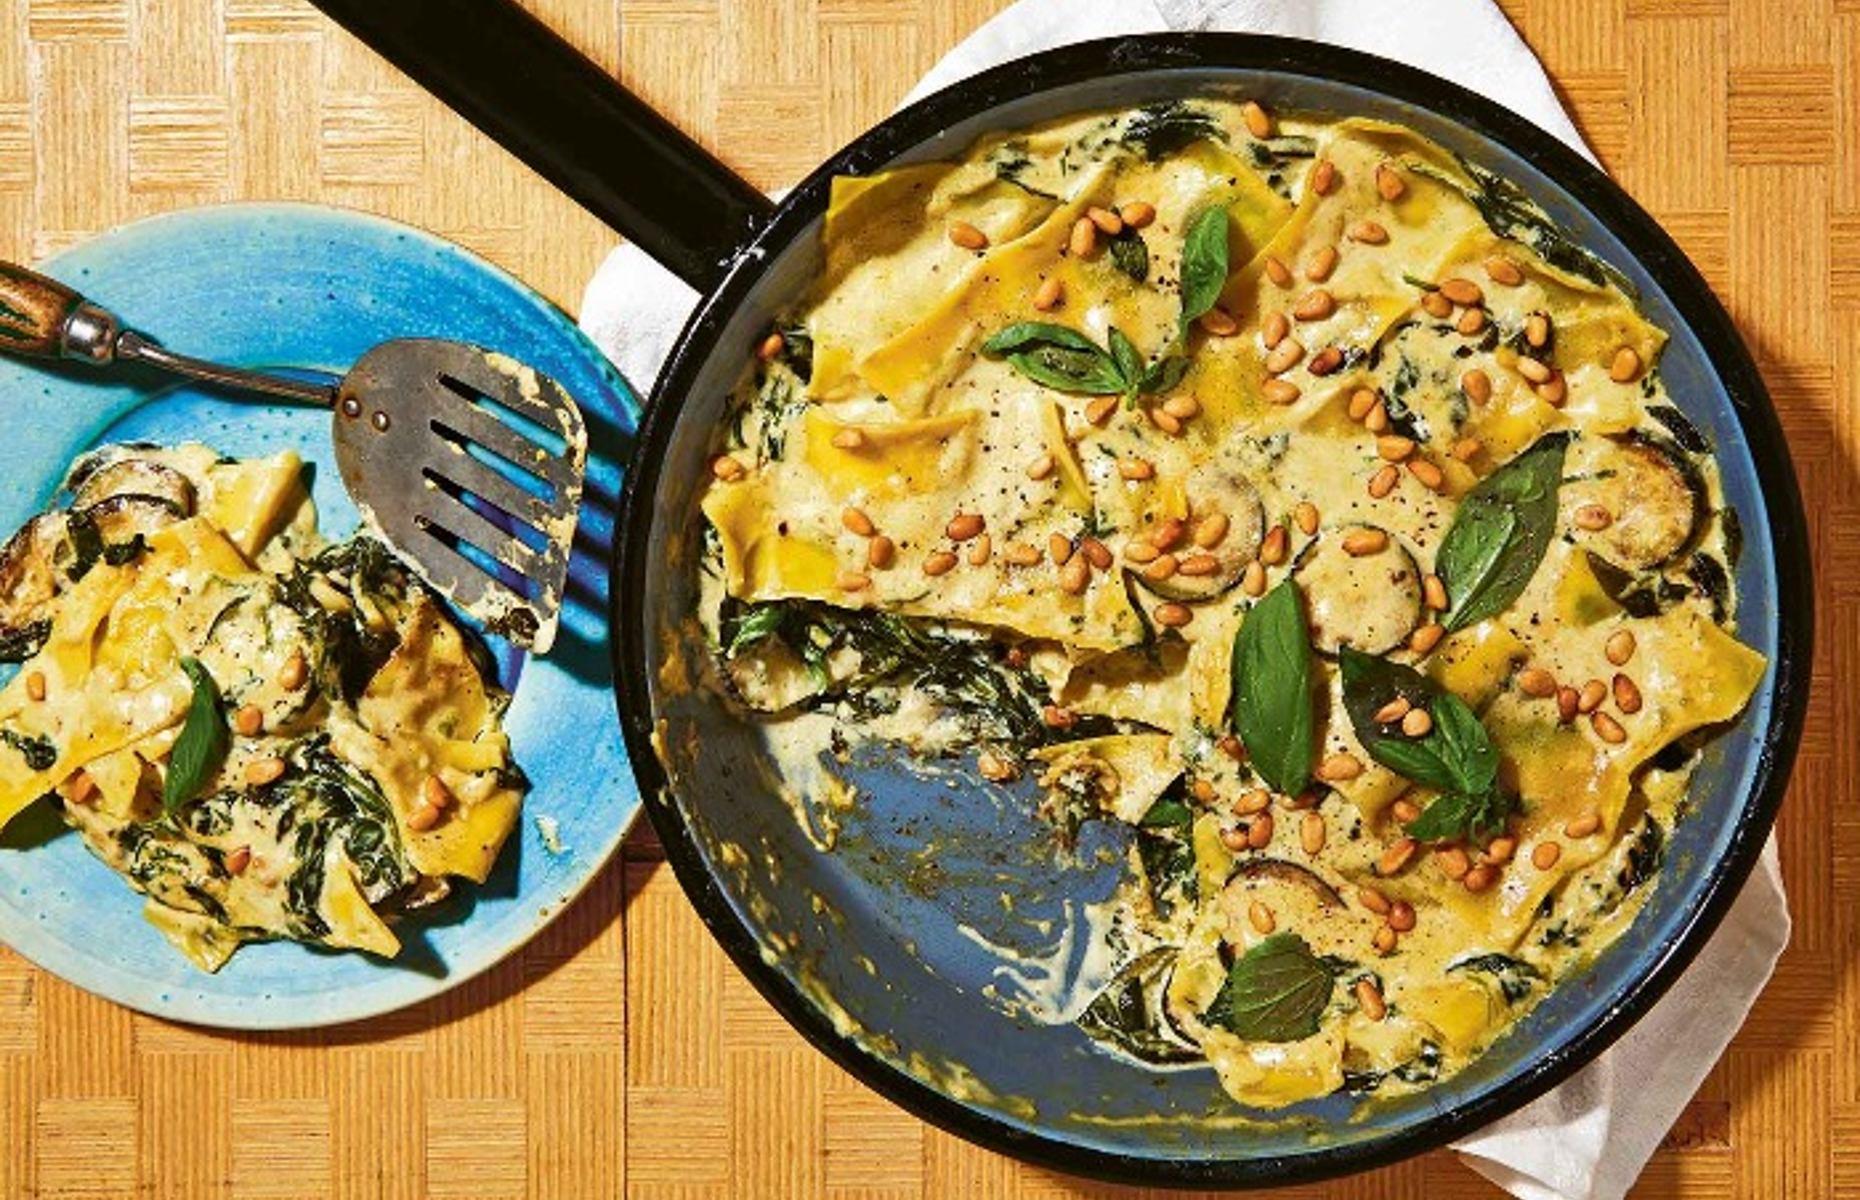 65 mouth-wateringly good vegetarian recipes for all occasions